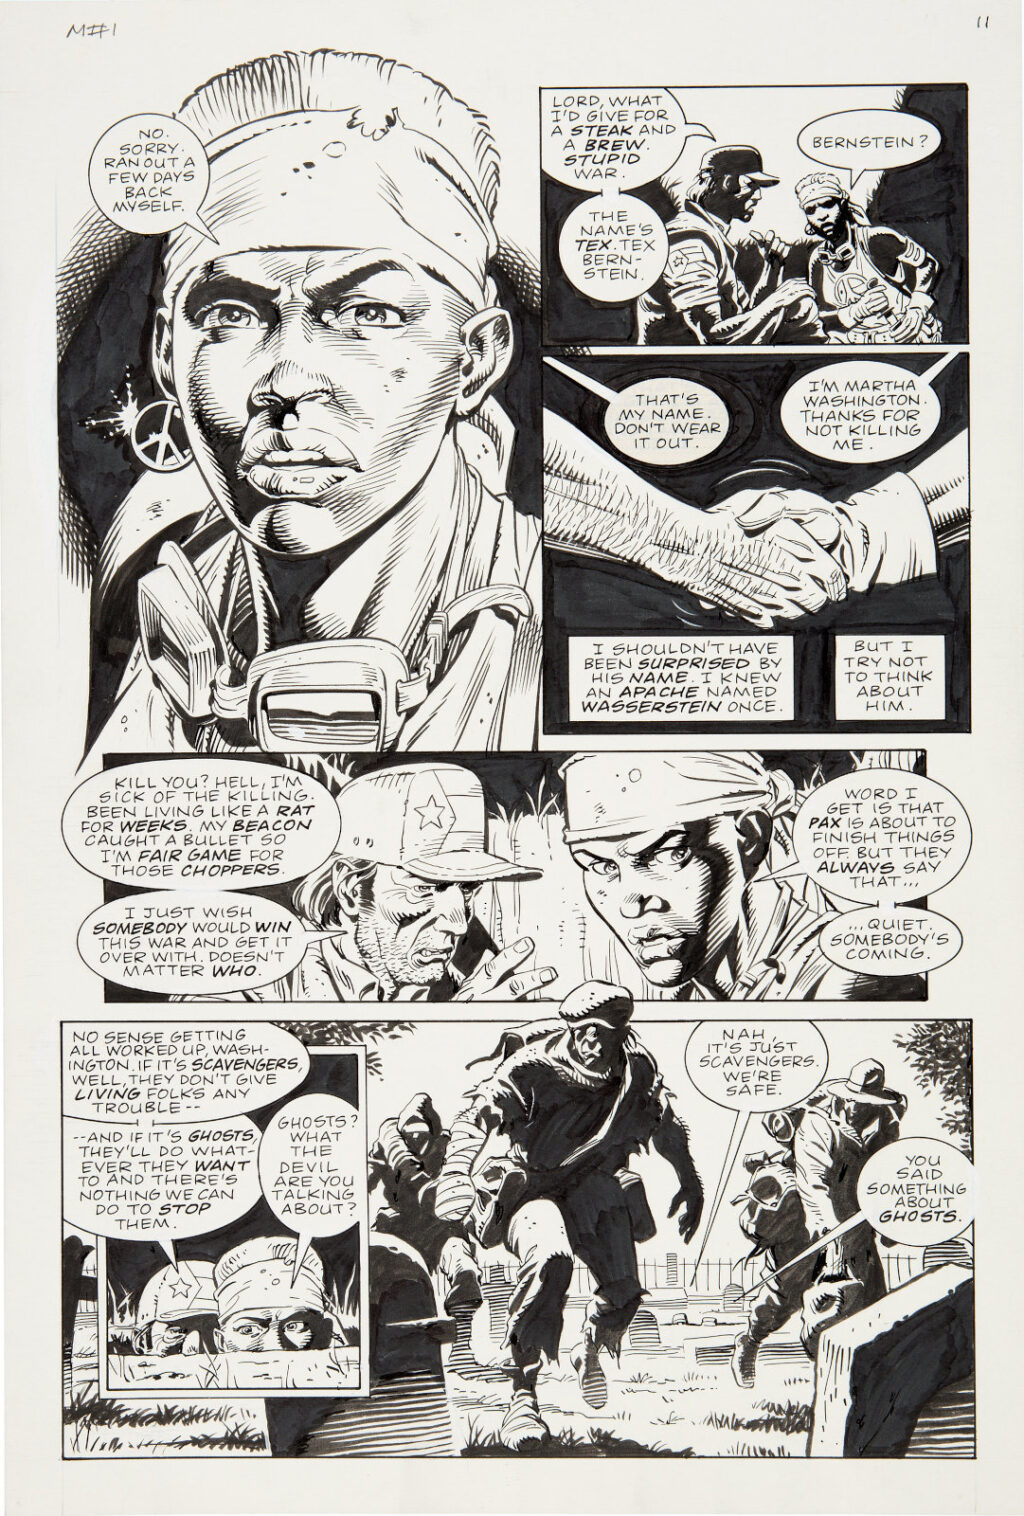 Martha Washington Goes To War issue 1 page 11 by Dave Gibbons